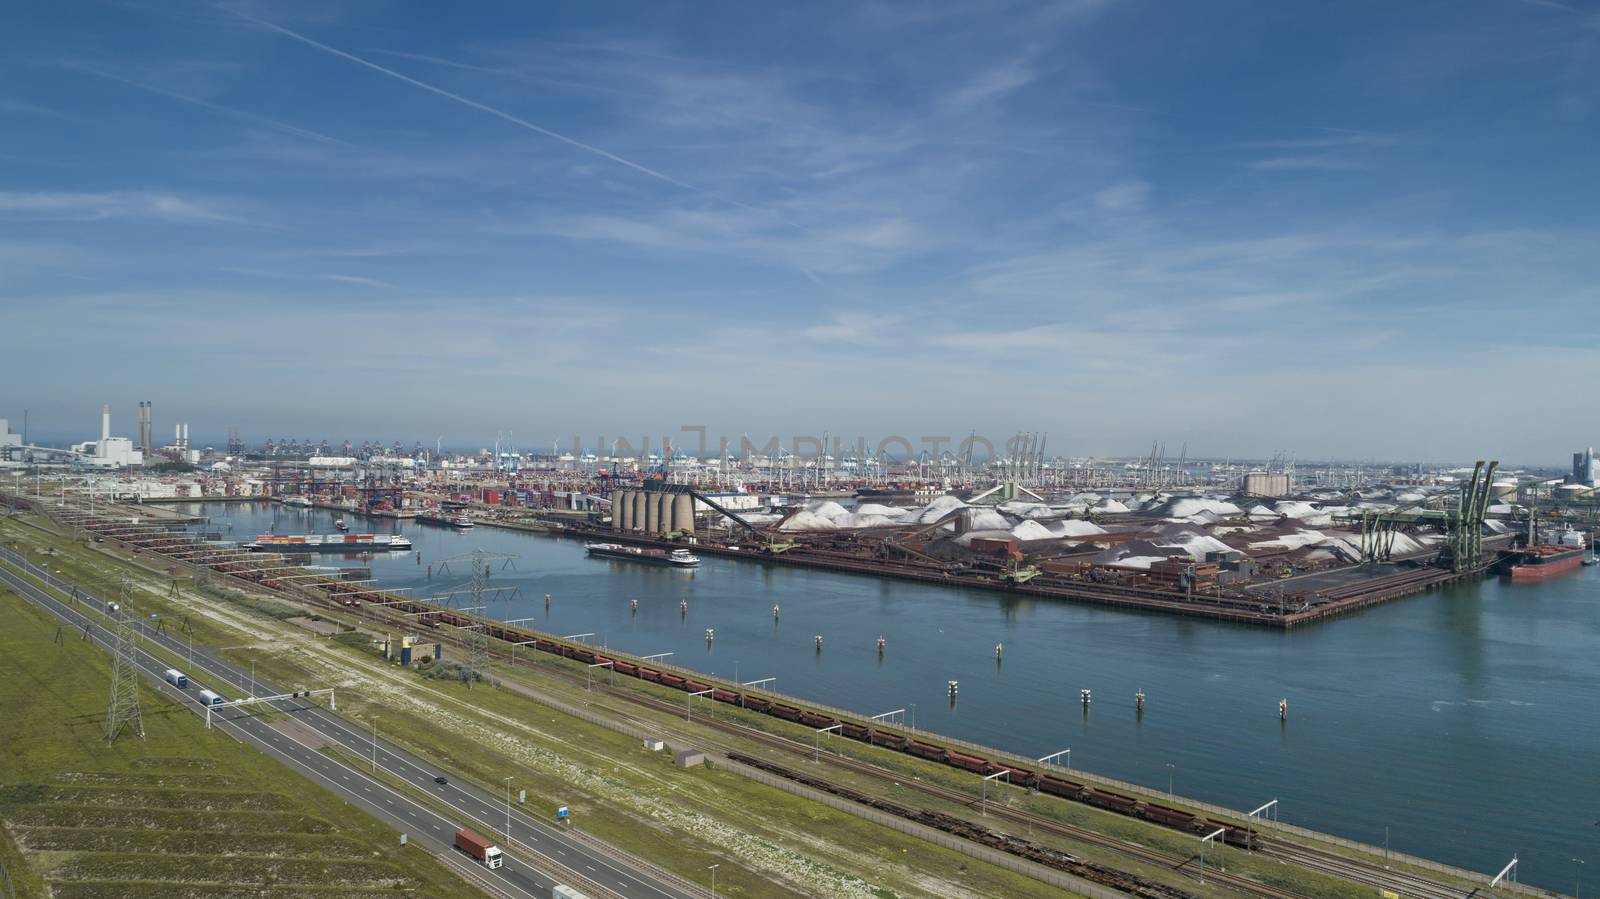 Industrial area in the Port of Rotterdam in The Netherlands. por by Tjeerdkruse